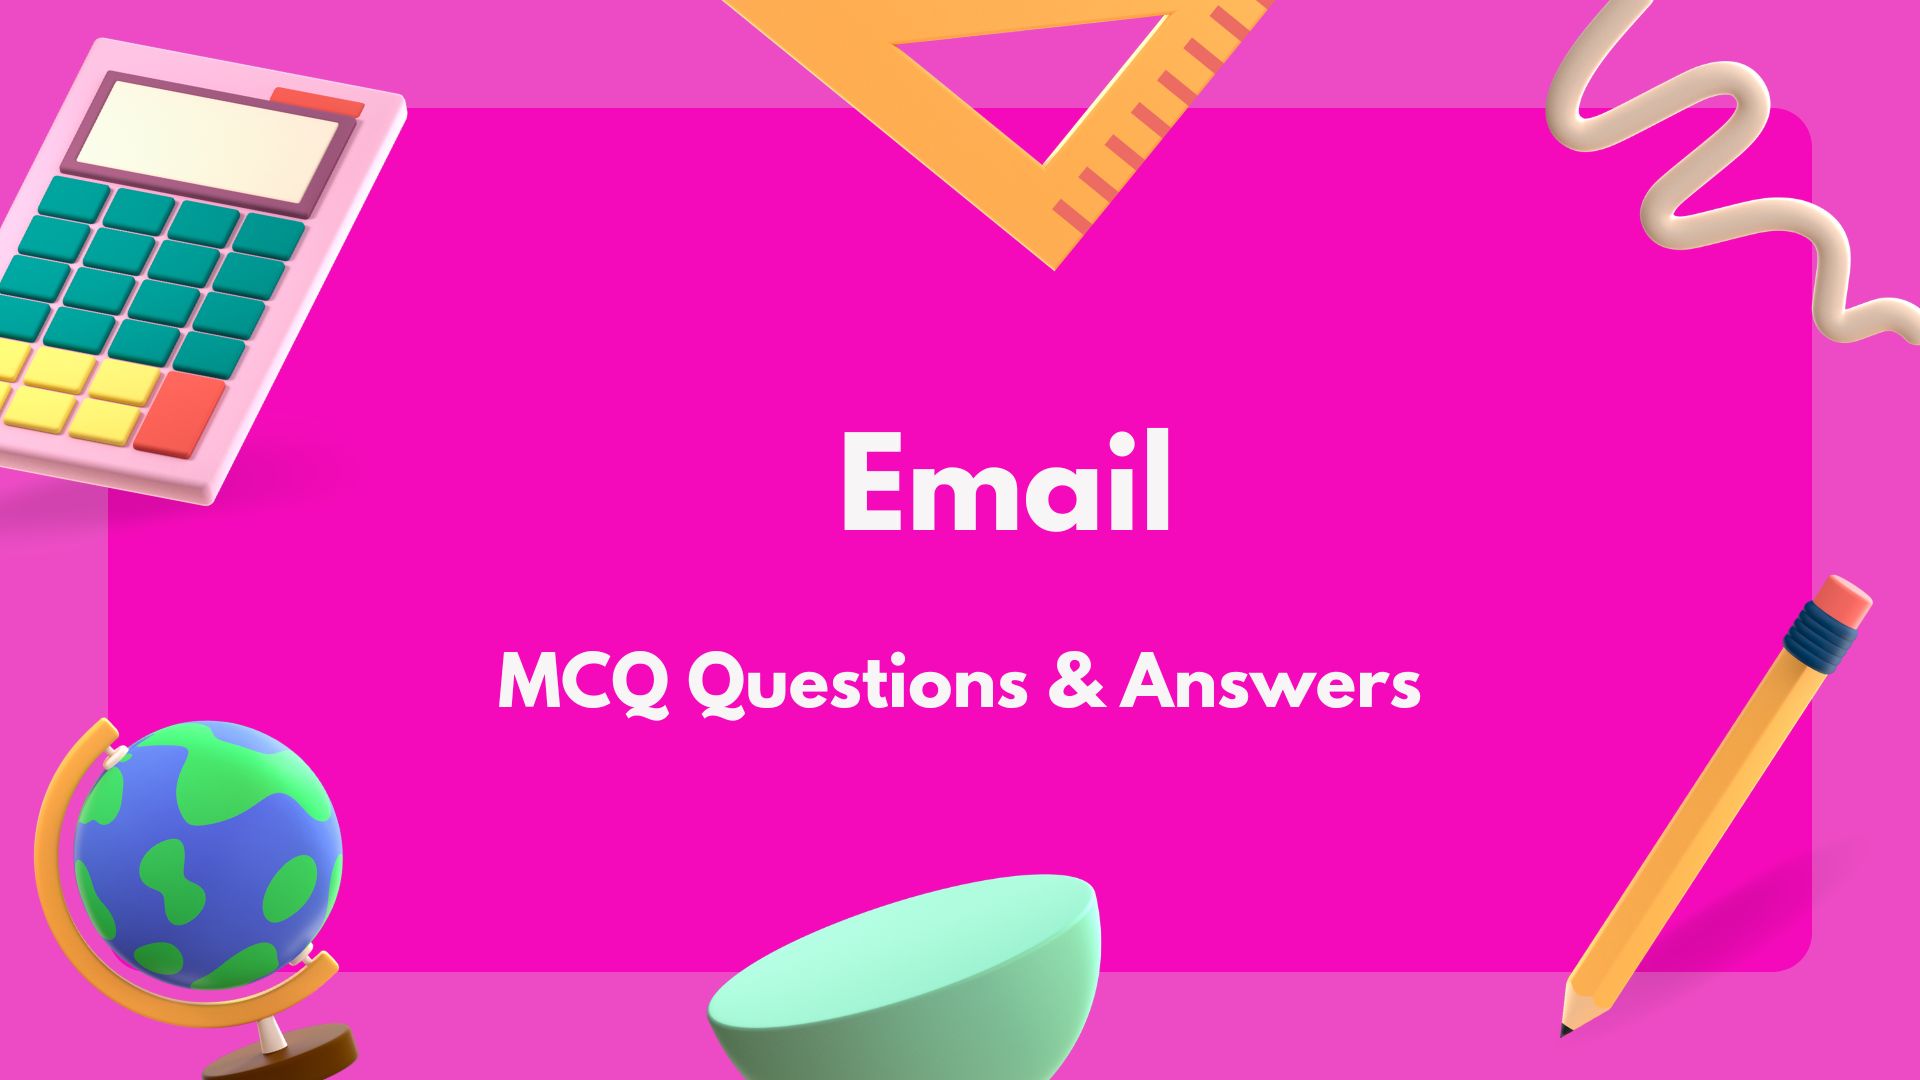 Email MCQ Questions & Answers